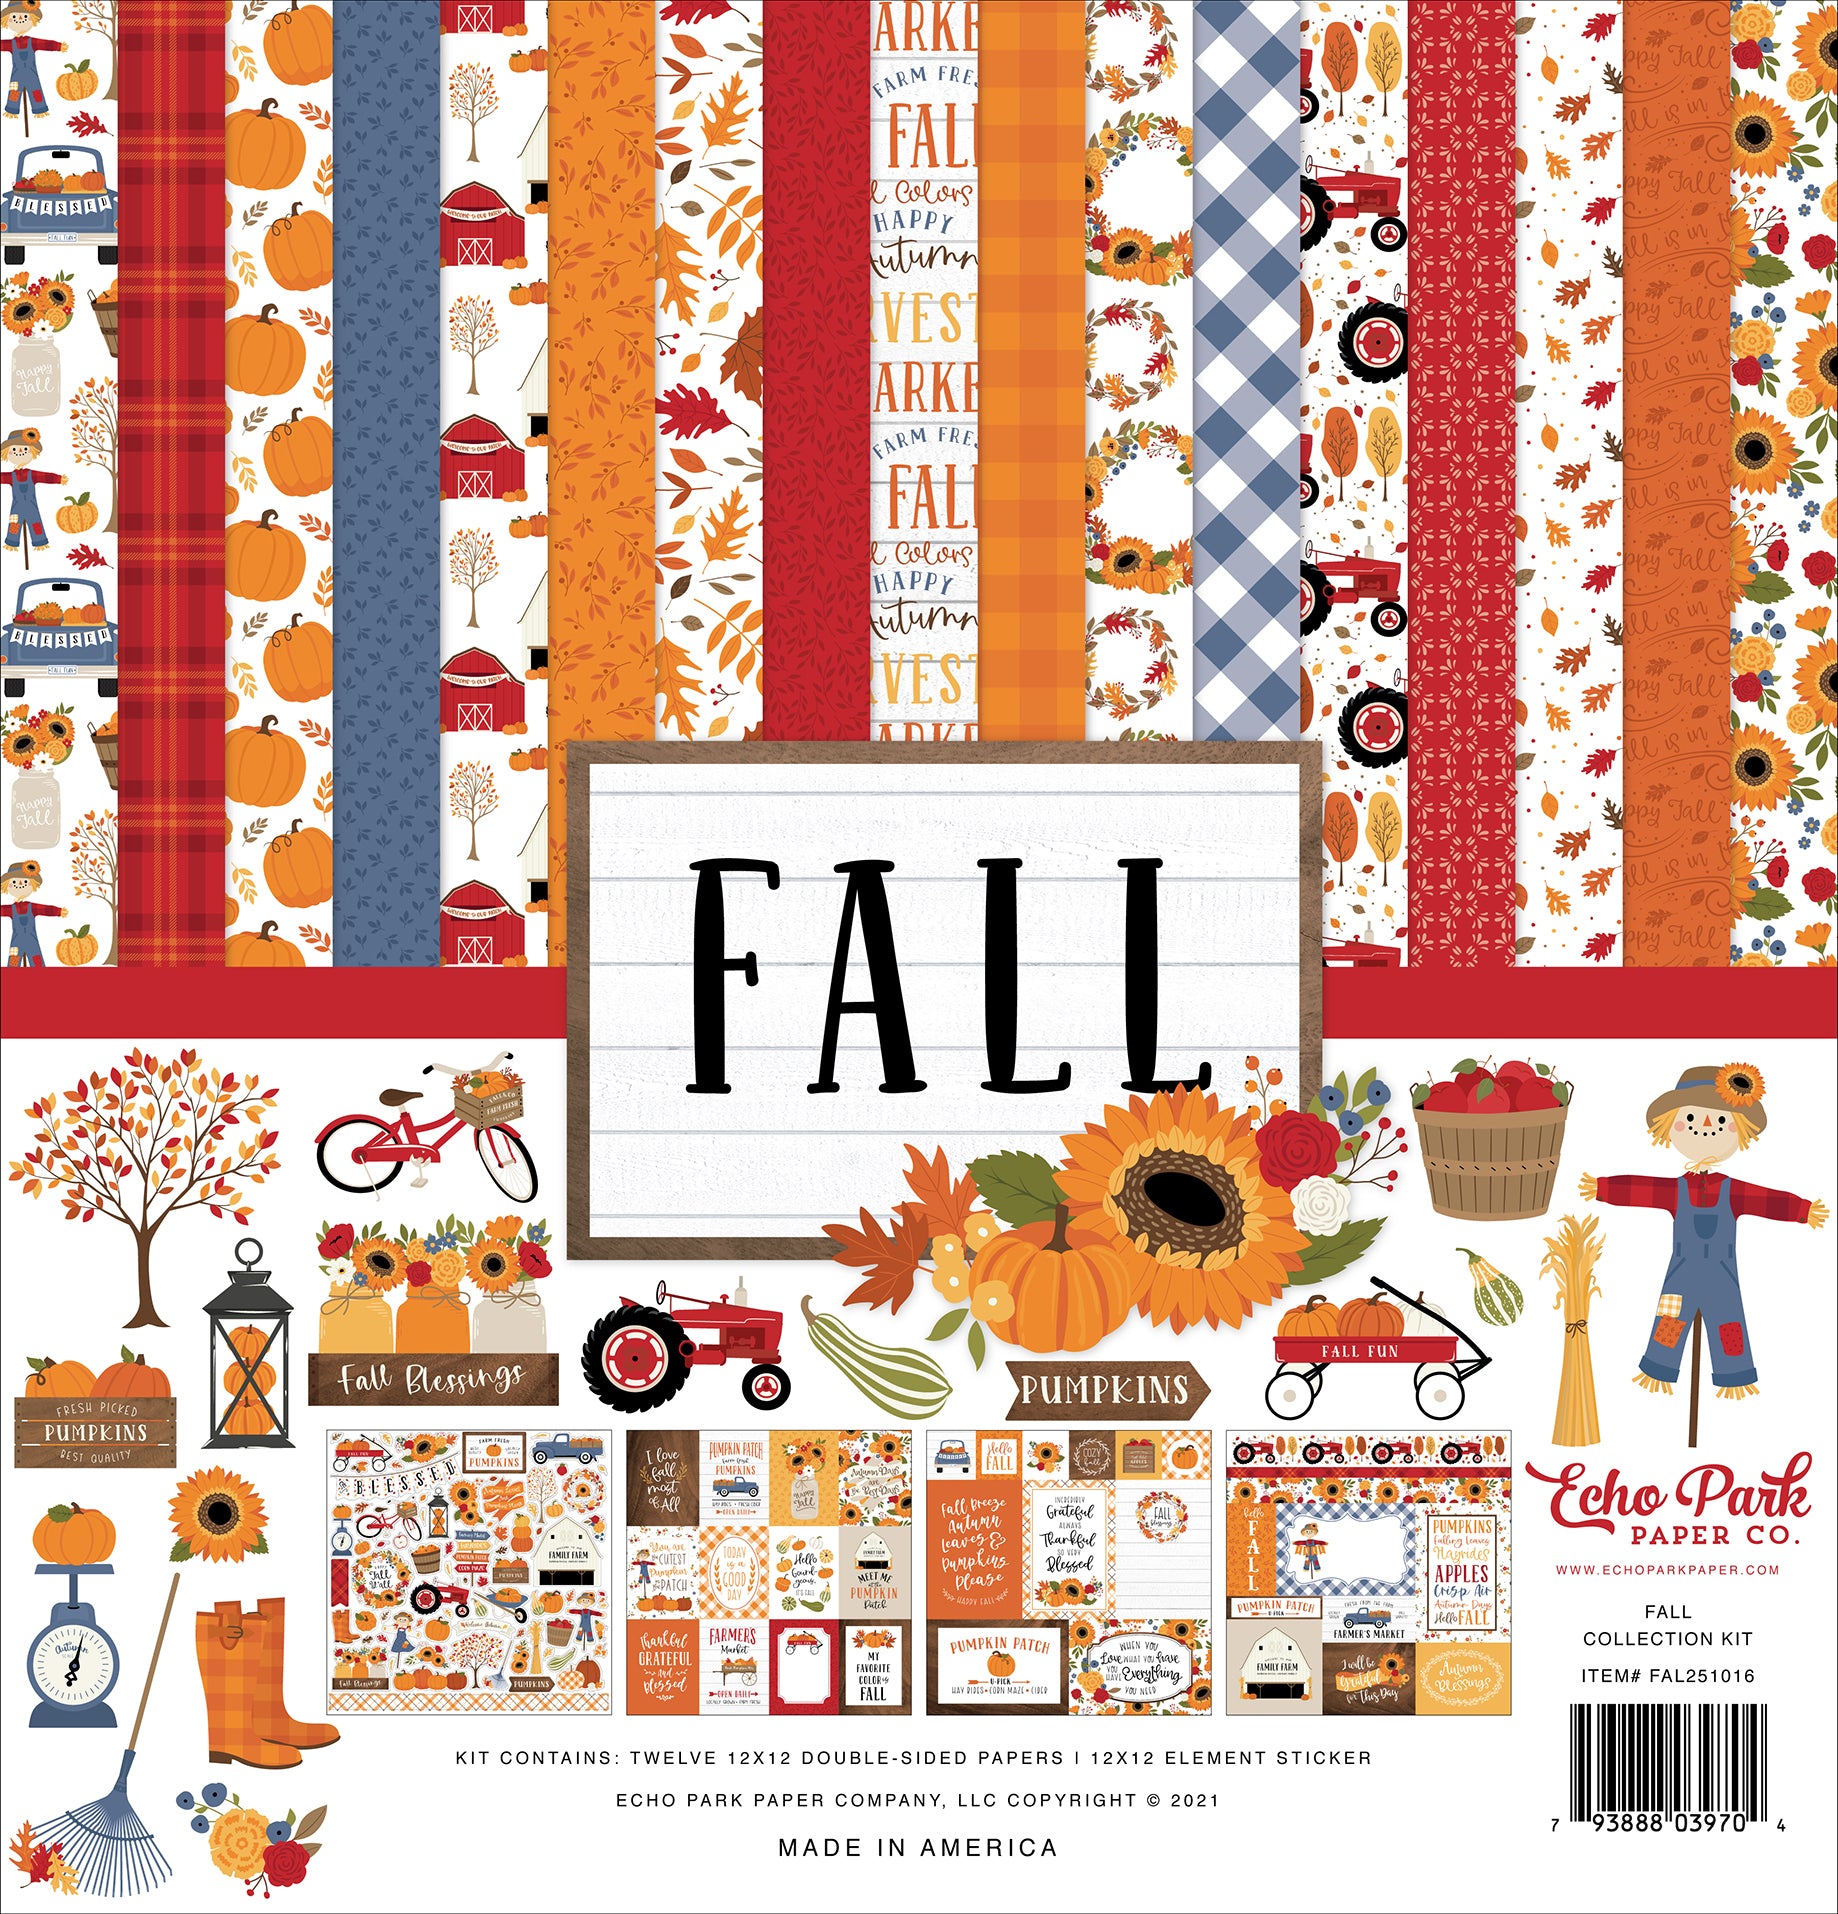 Echo Park Paper Co. Hello Fall Collection Kit, Eleven 12X12 Double